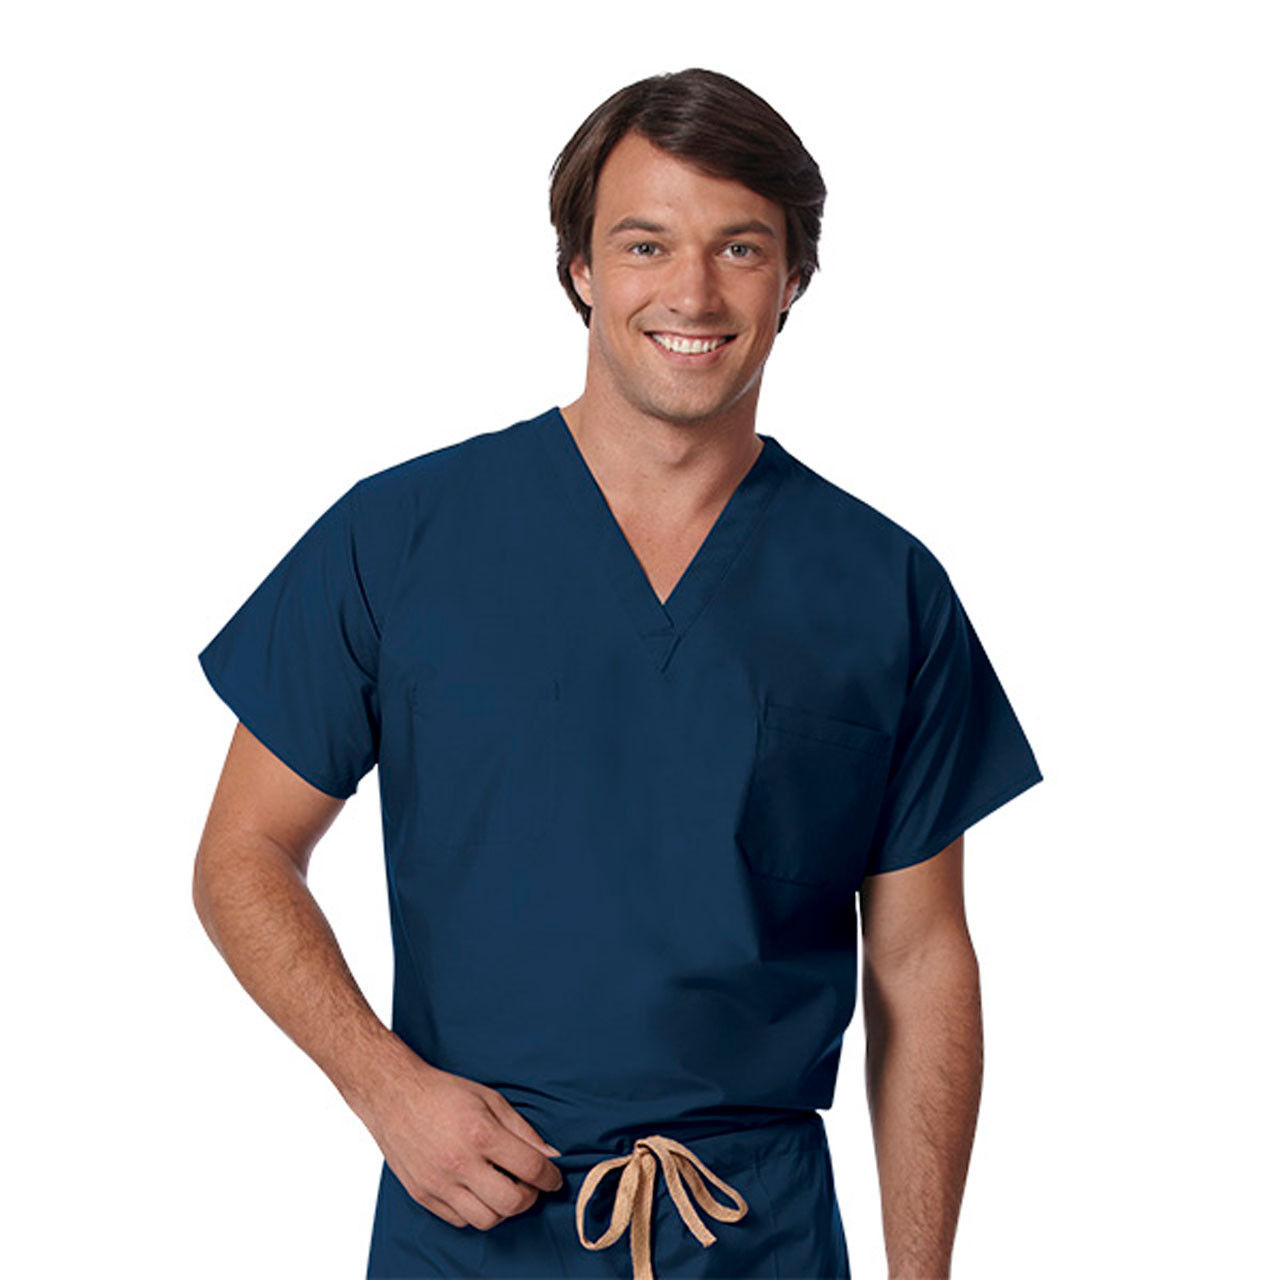 Do navy surgical scrubs have any special features?